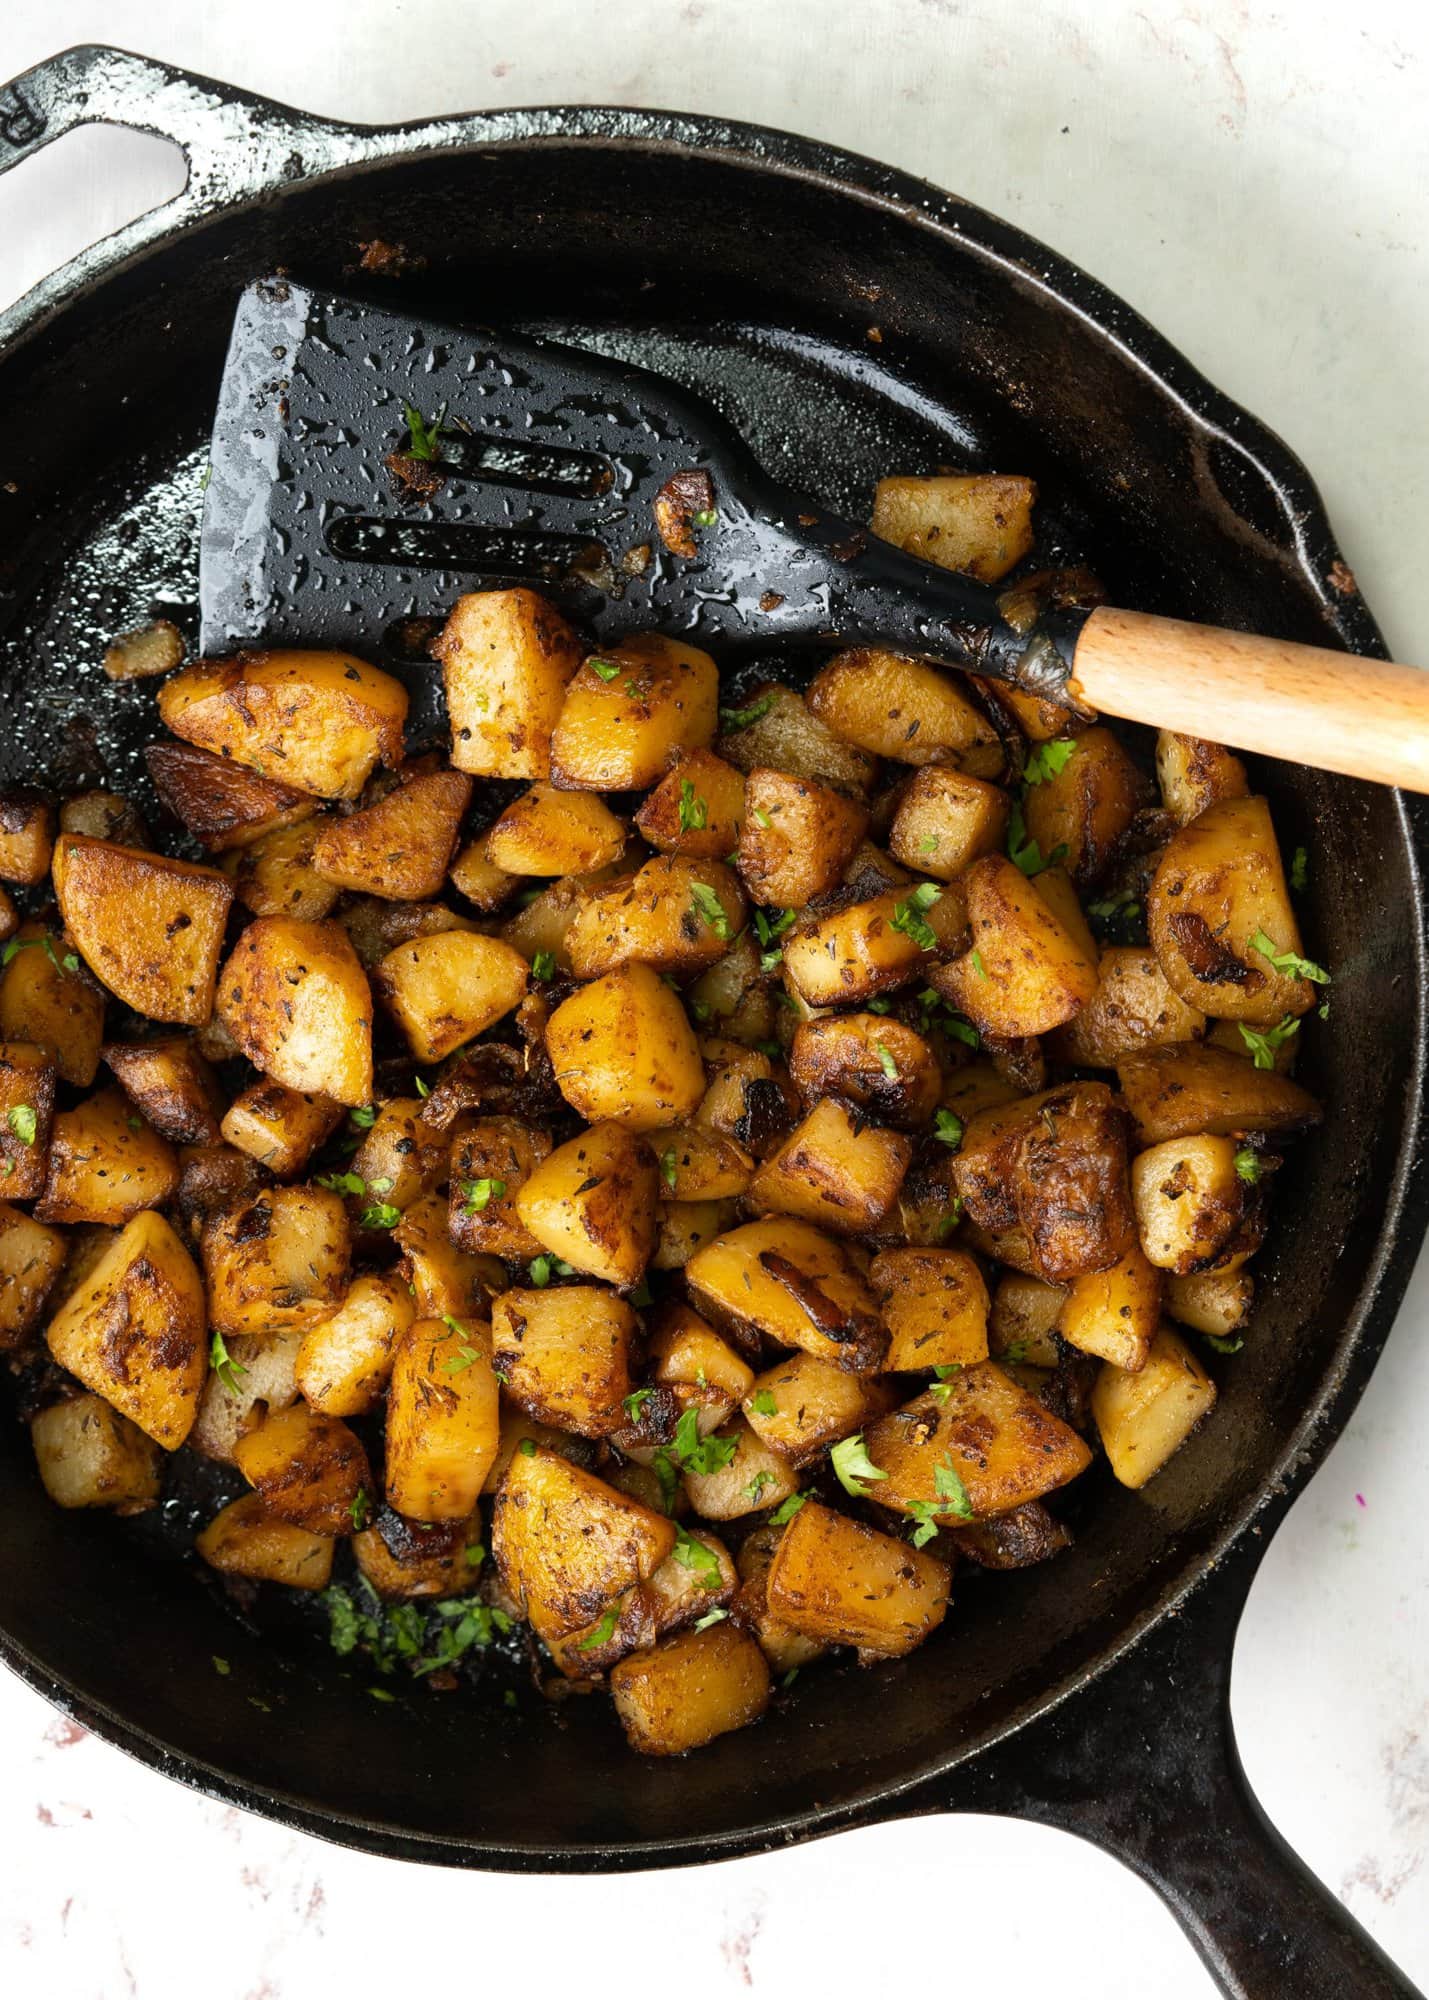 Crispy breakfast potatoes made in a skillet and shown with a spatula.